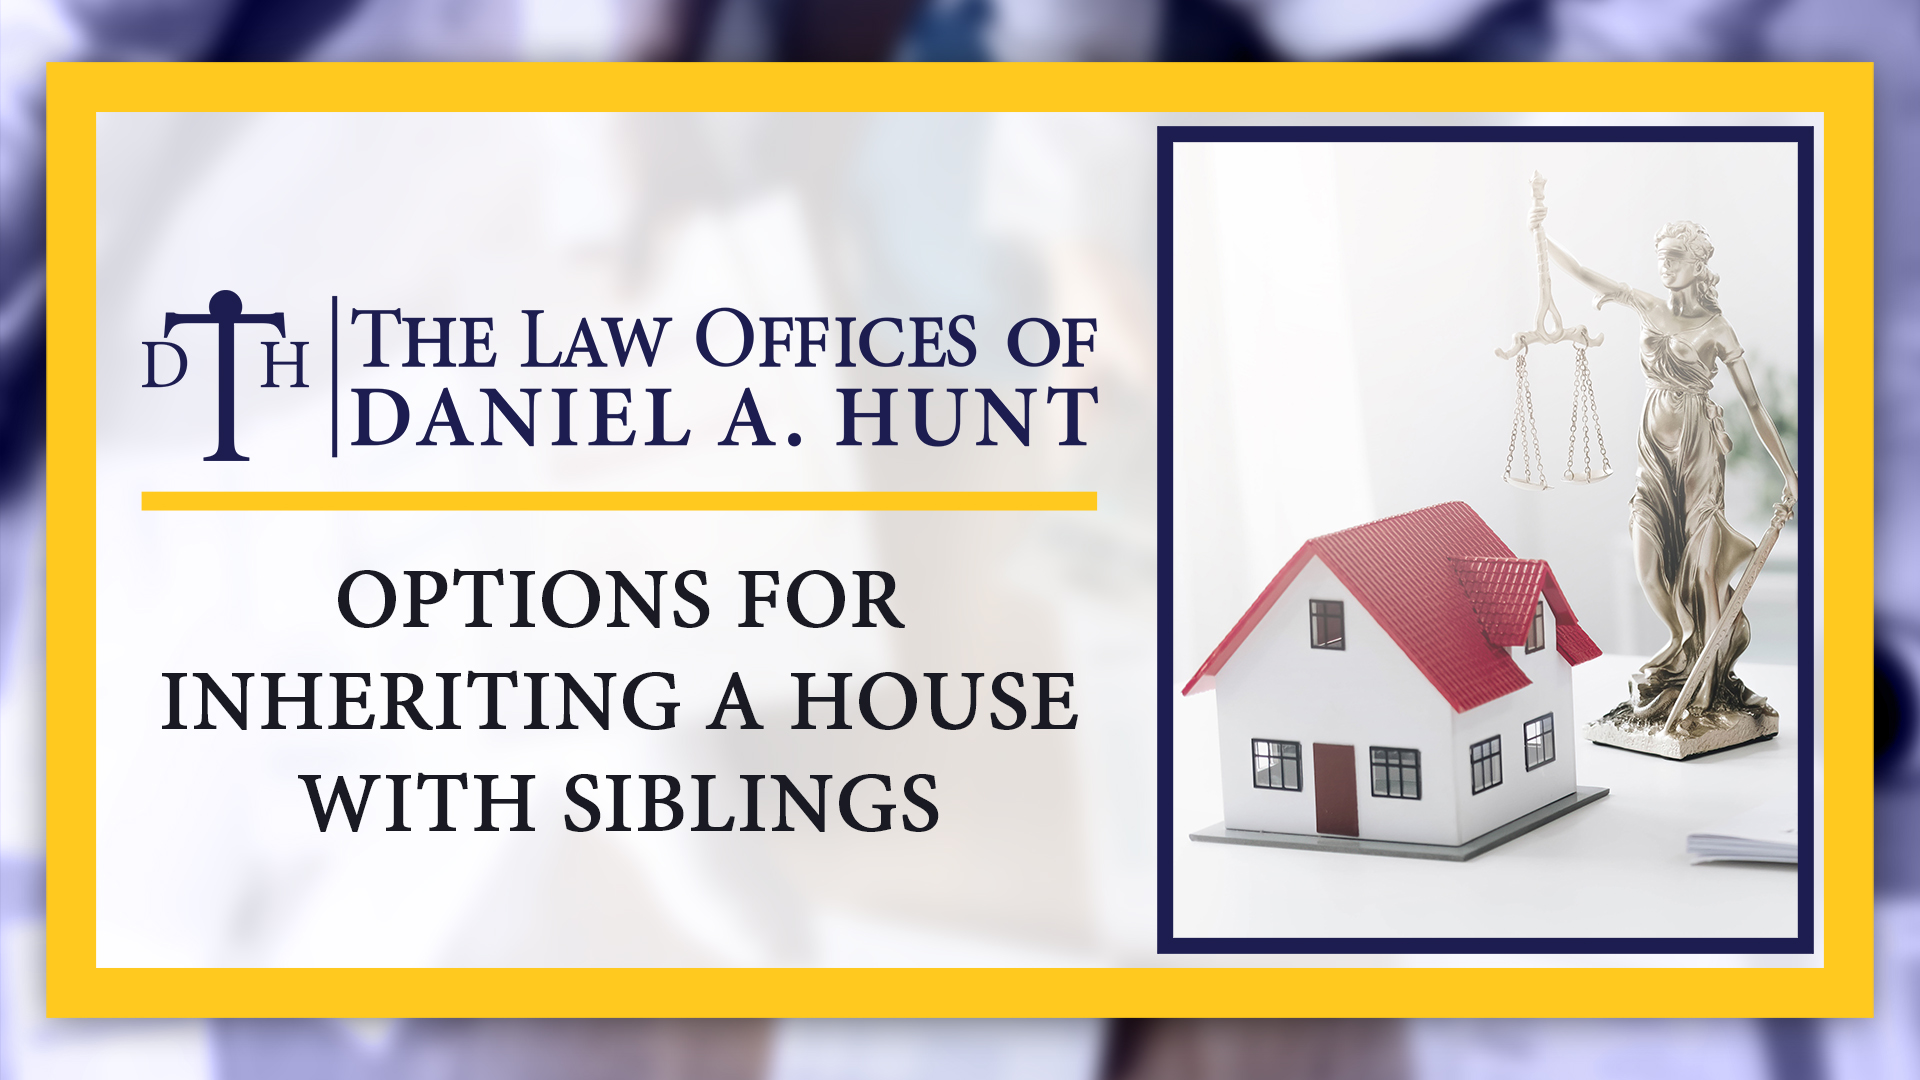 Options for Inheriting a House with Siblings